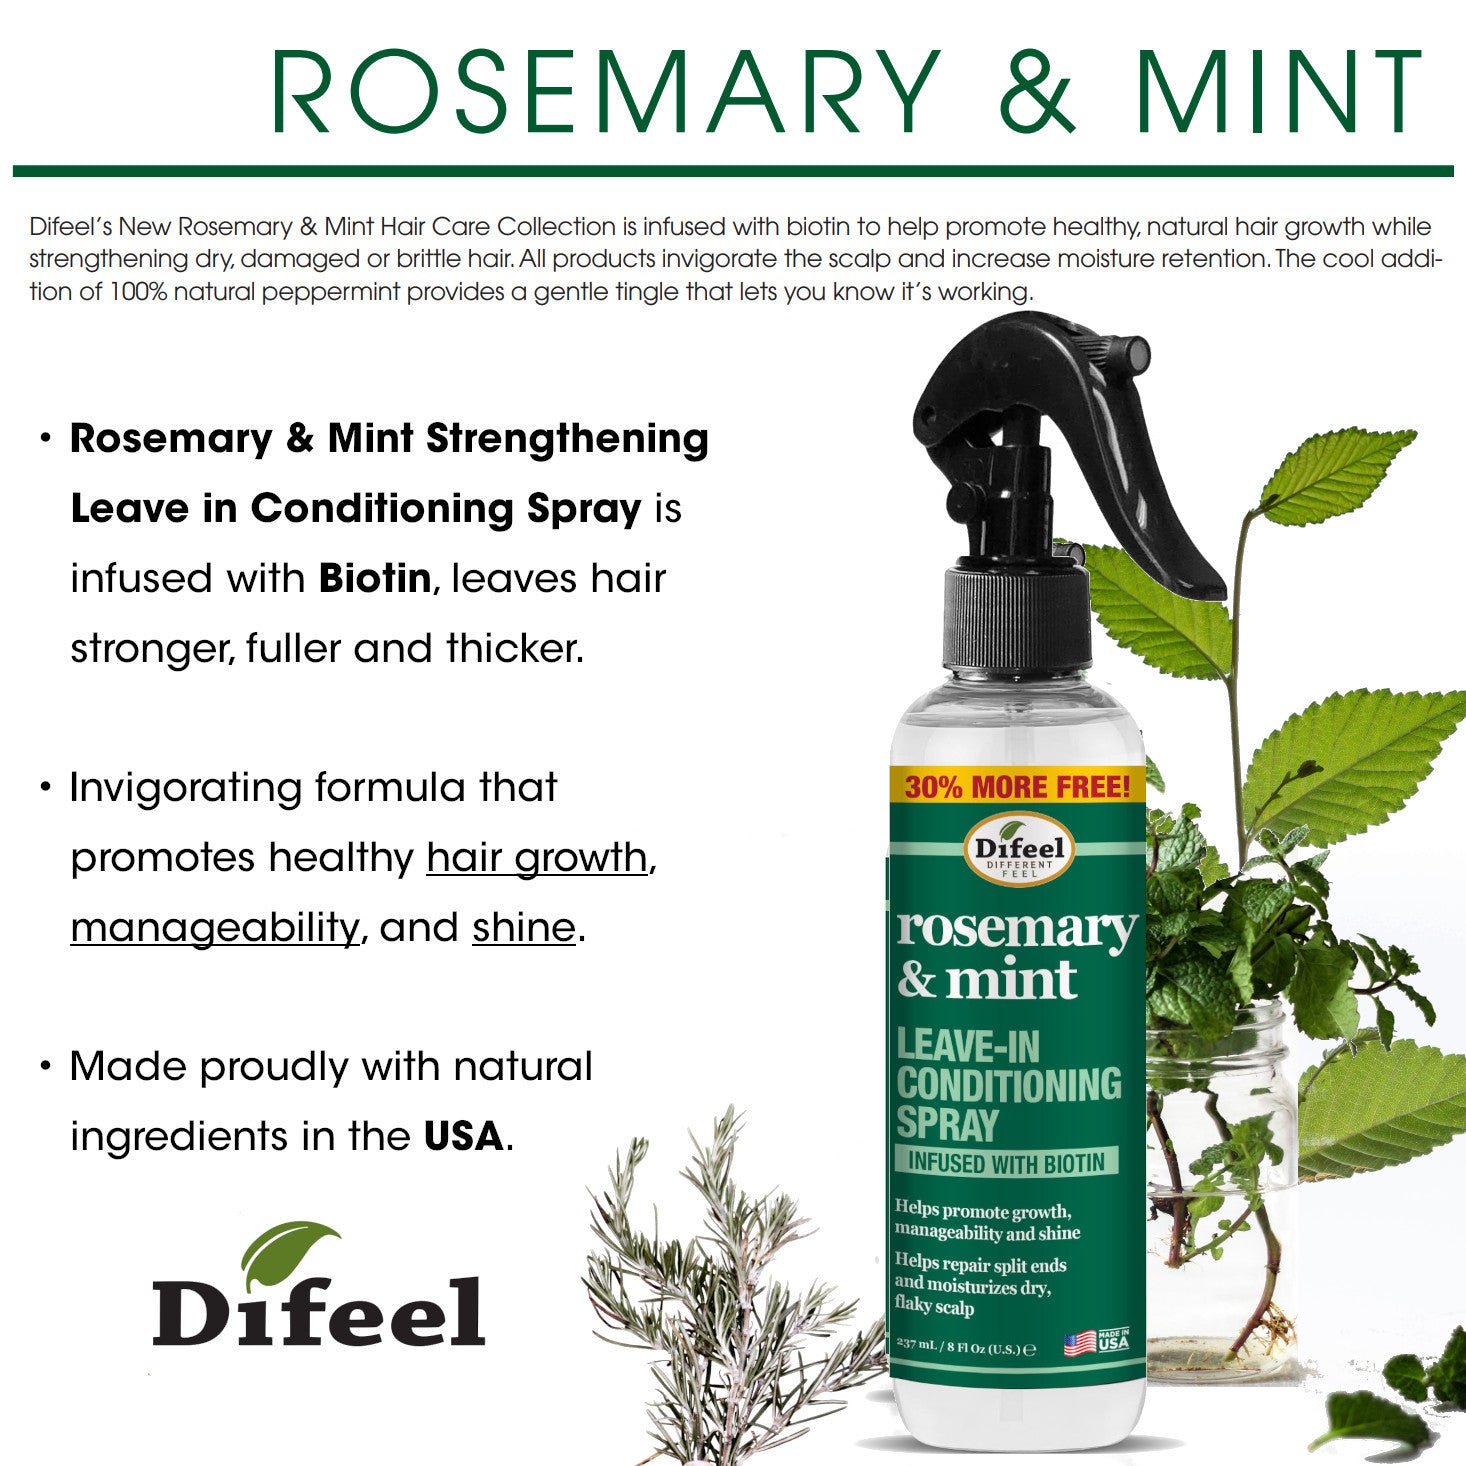 Difeel Rosemary & Mint Hair Oil 8oz & Leave in Conditioning Spray 8oz 2-PC Gift Set